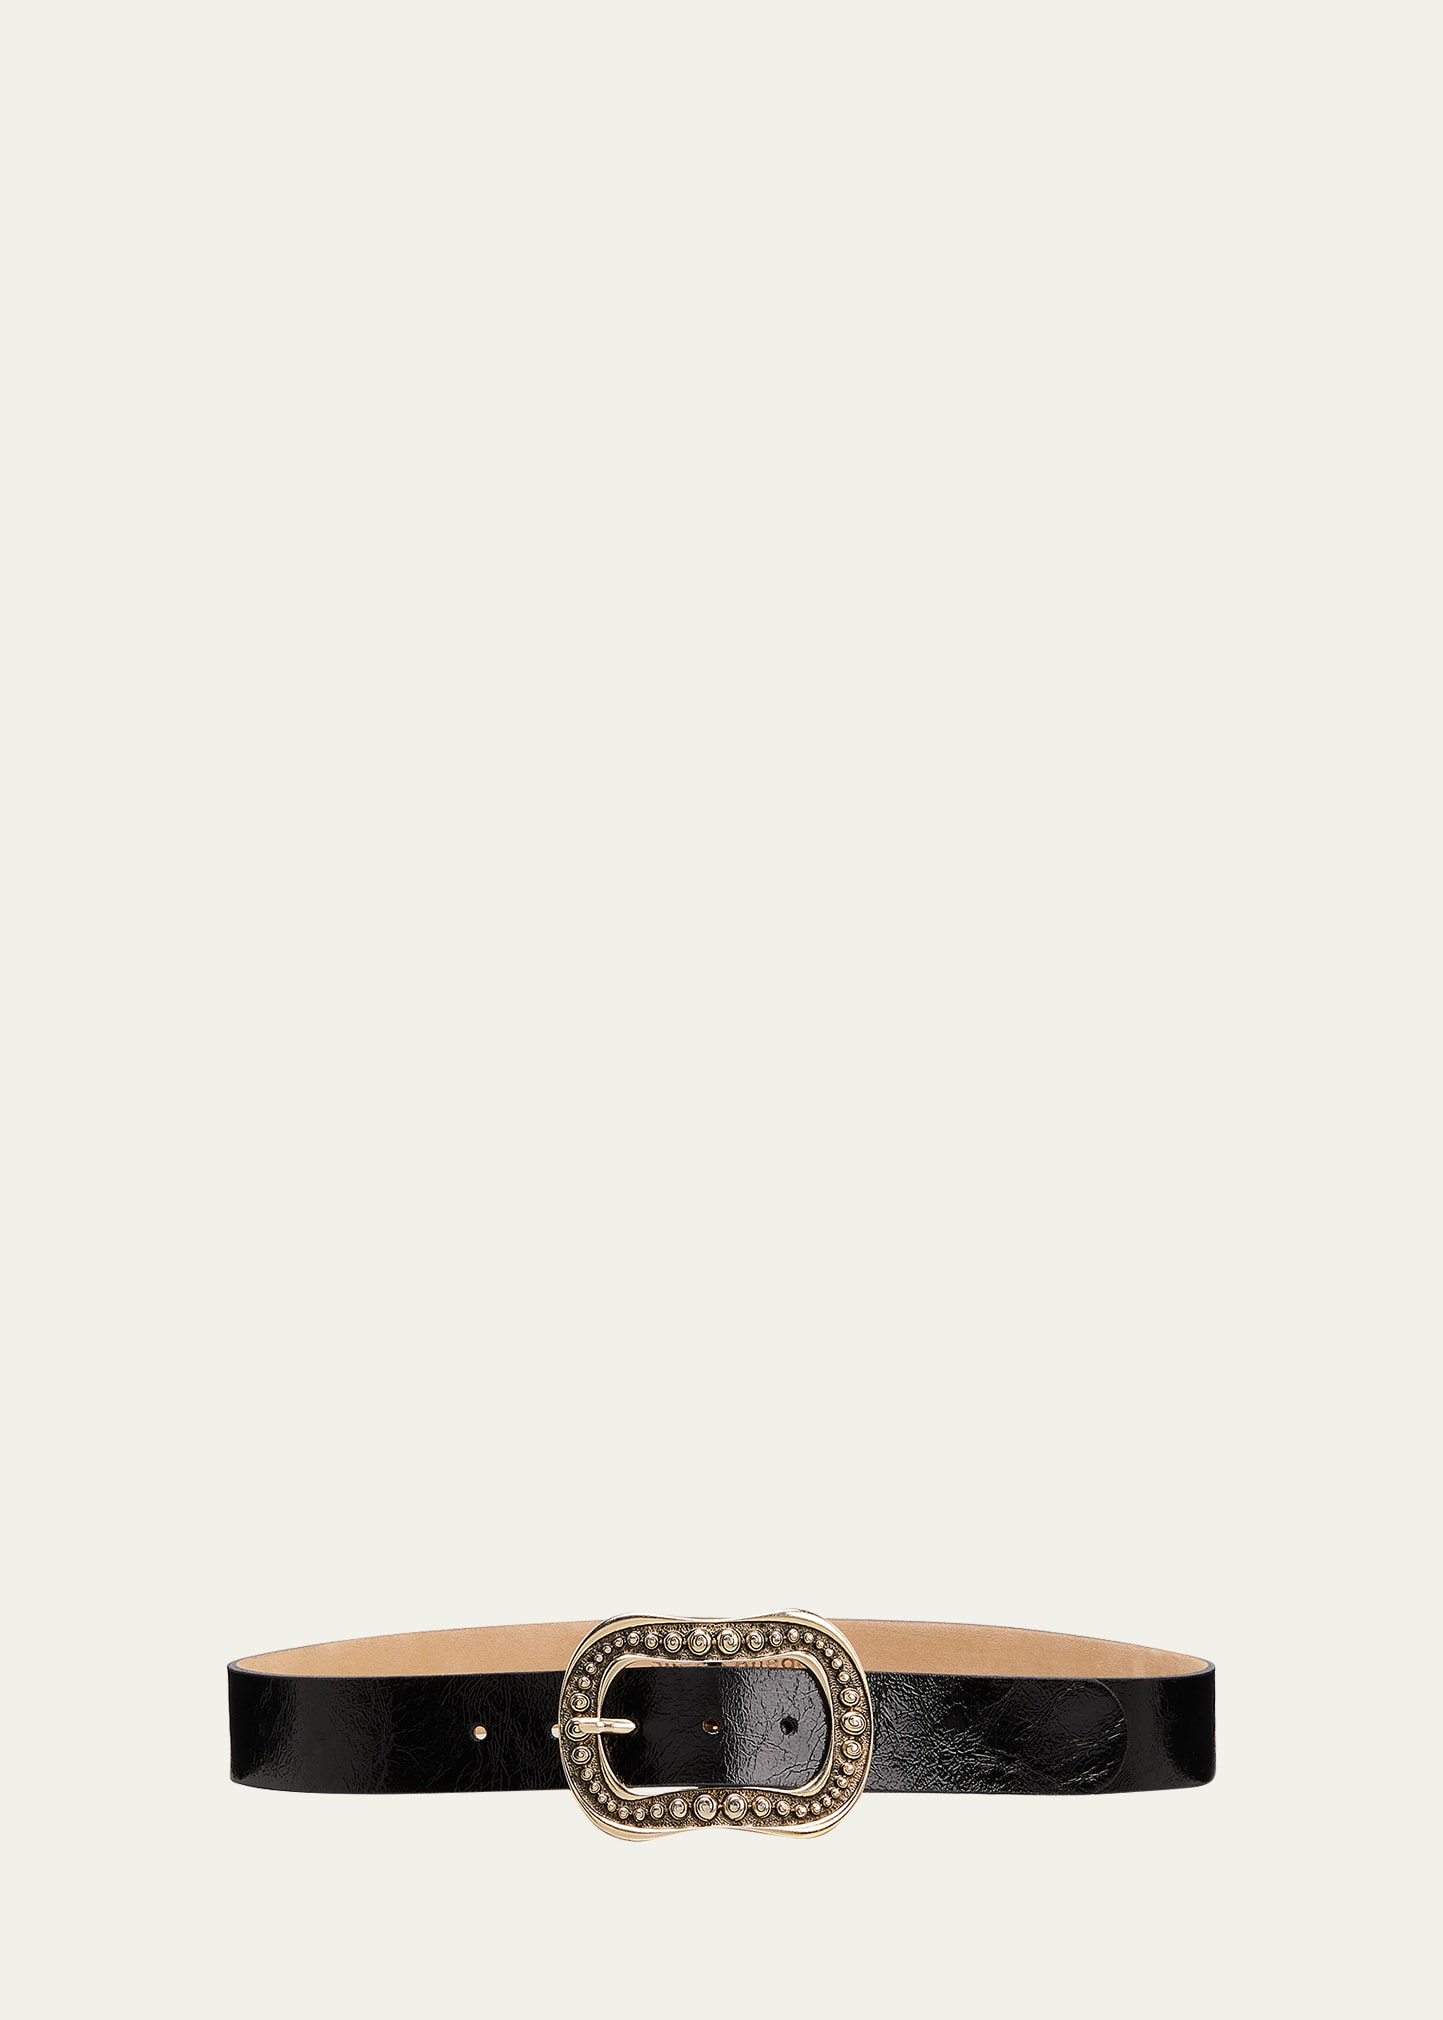 Streets Ahead Studded Shiny Leather Buckle Belt In Black / Gold